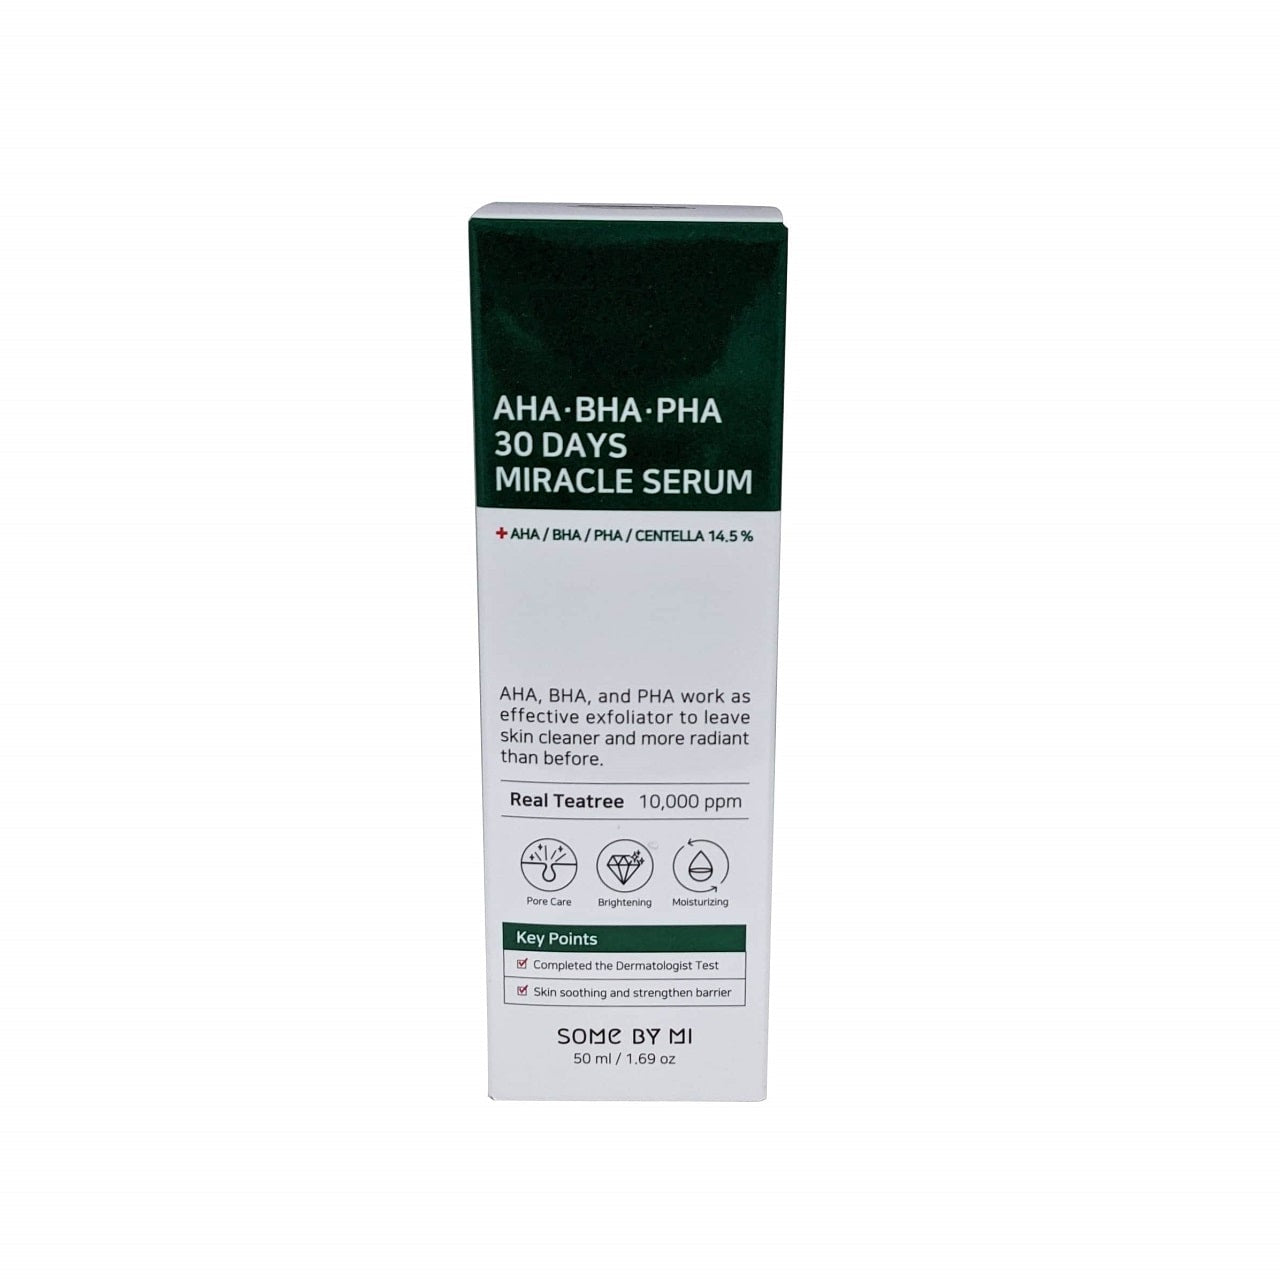 Product label for SOME BY MI AHA BHA PHA 30 Days Miracle Serum